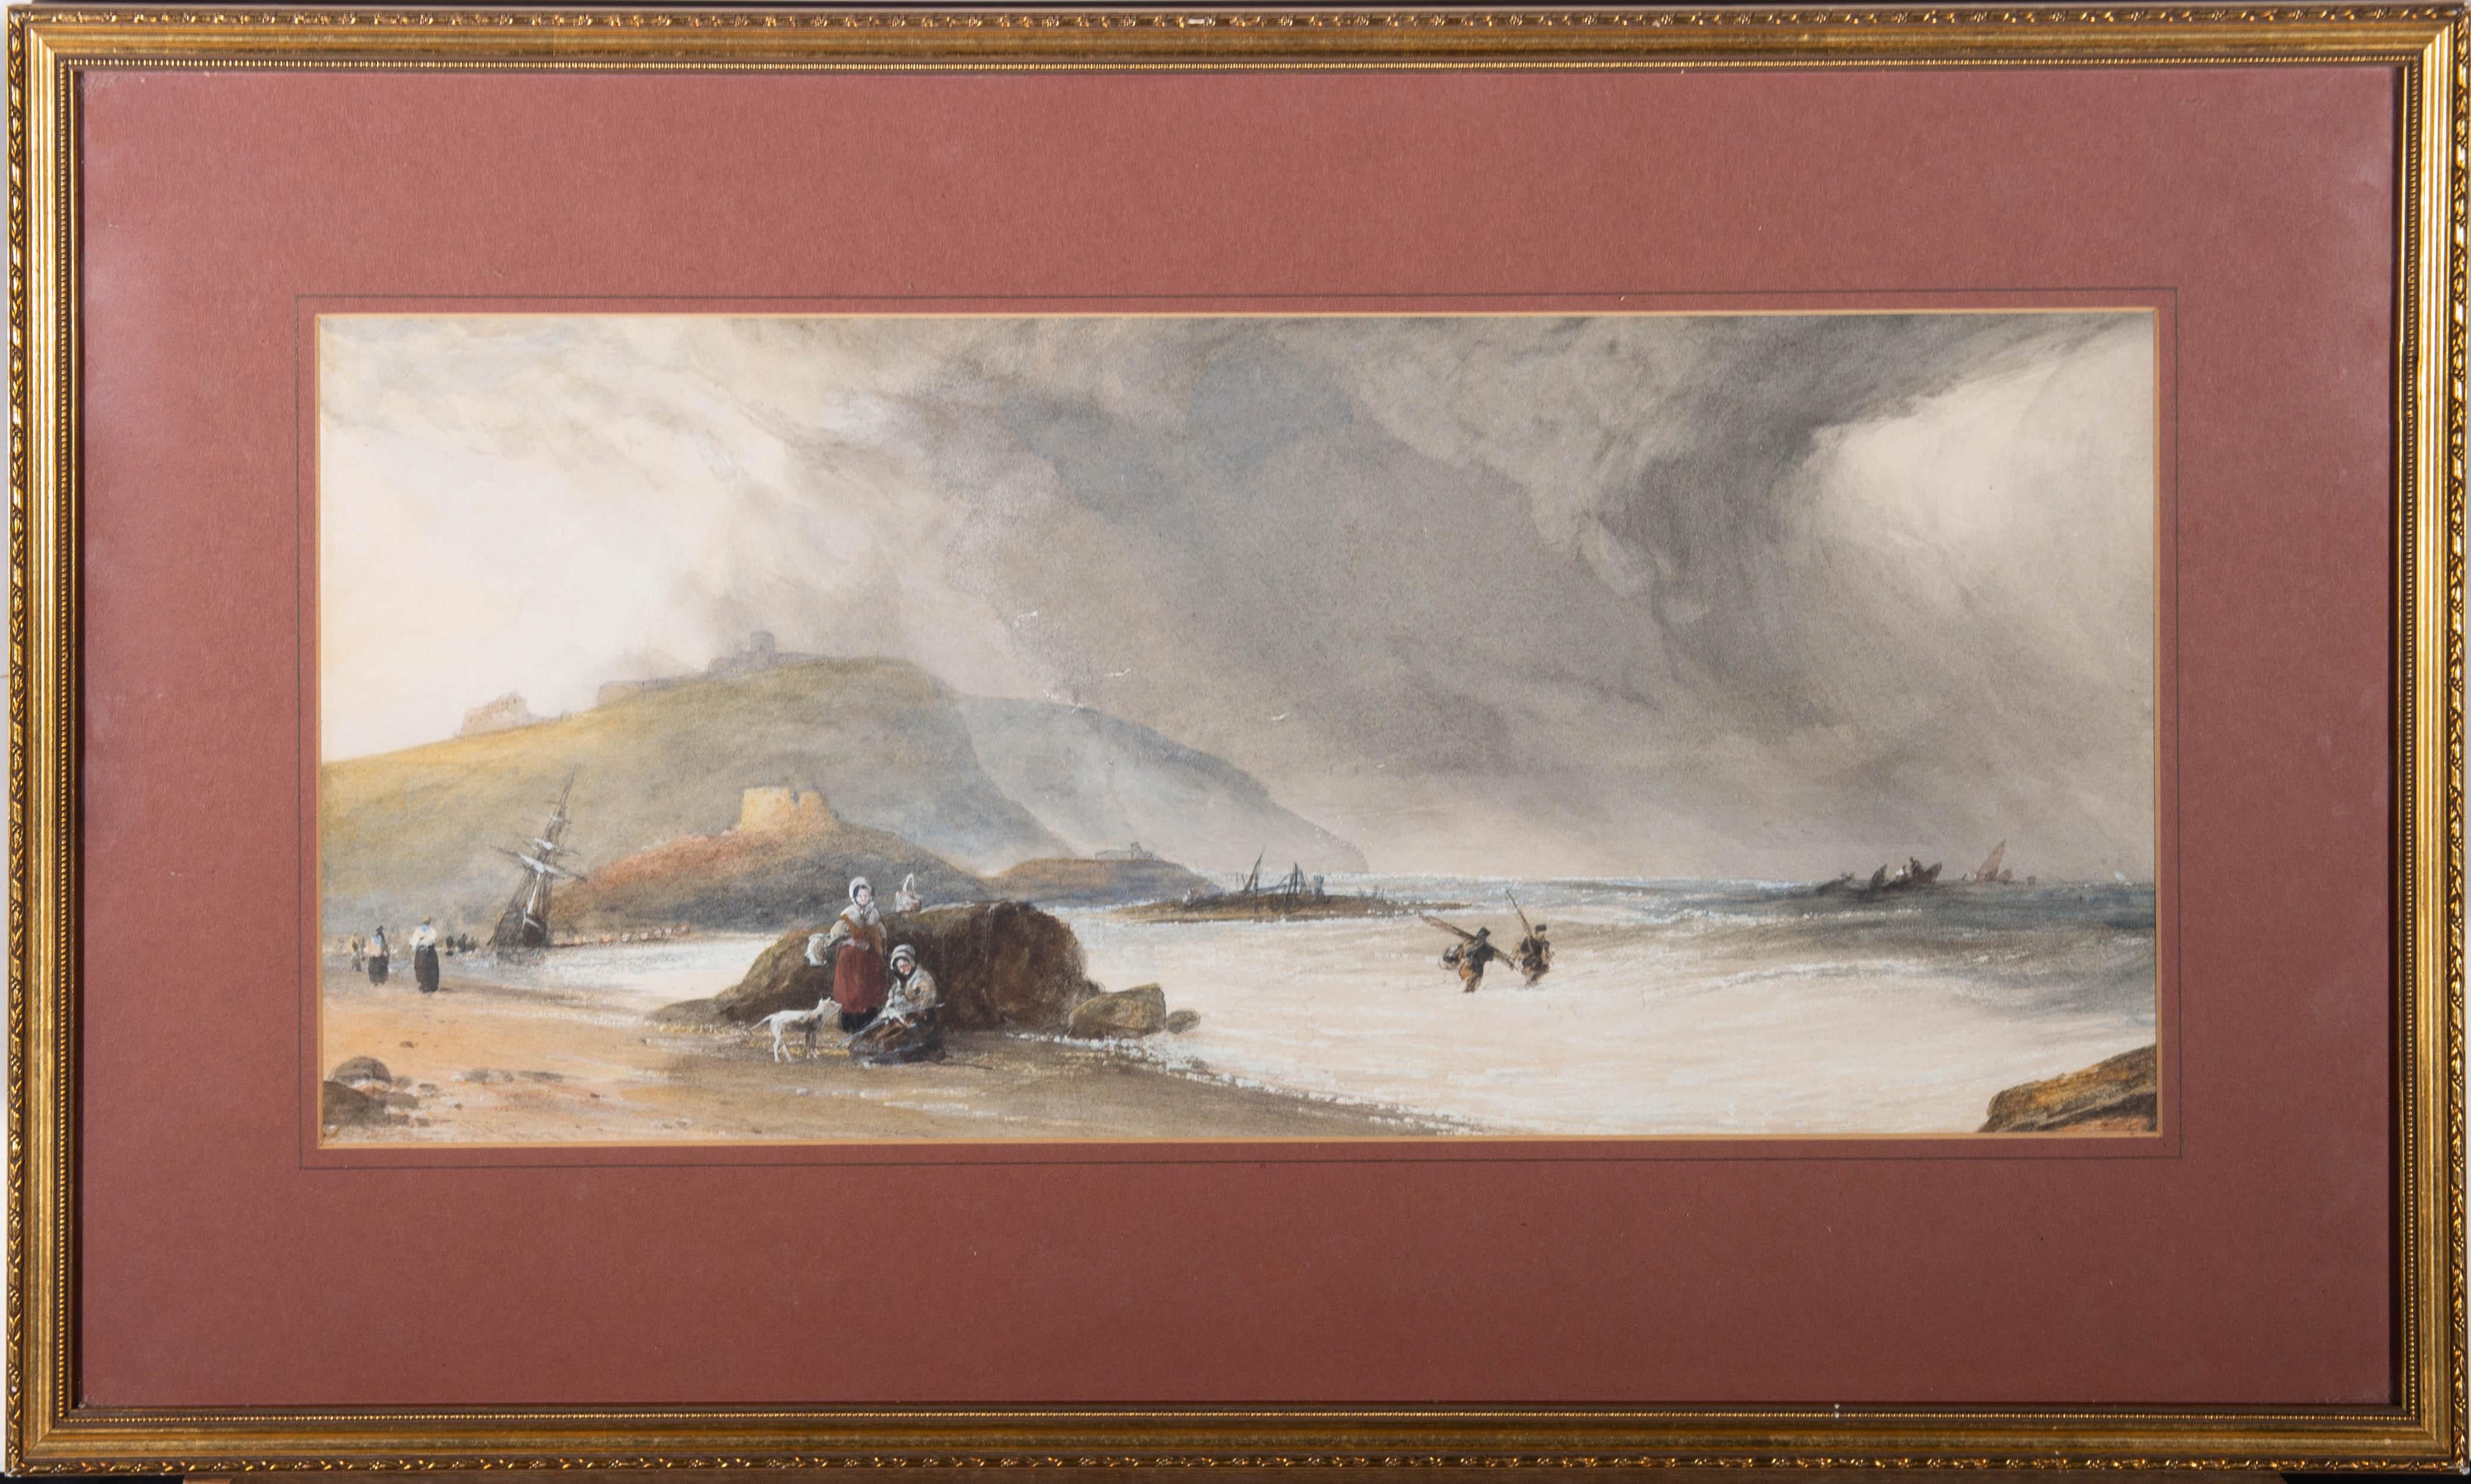 This charming scene depicts figures on the beach carrying fishing poles and baskets. To the distance beached ships are depicted on the shore and castle ruins can be seen atop the coastal cliffs. Signed and dated to the lower right. Presented in a